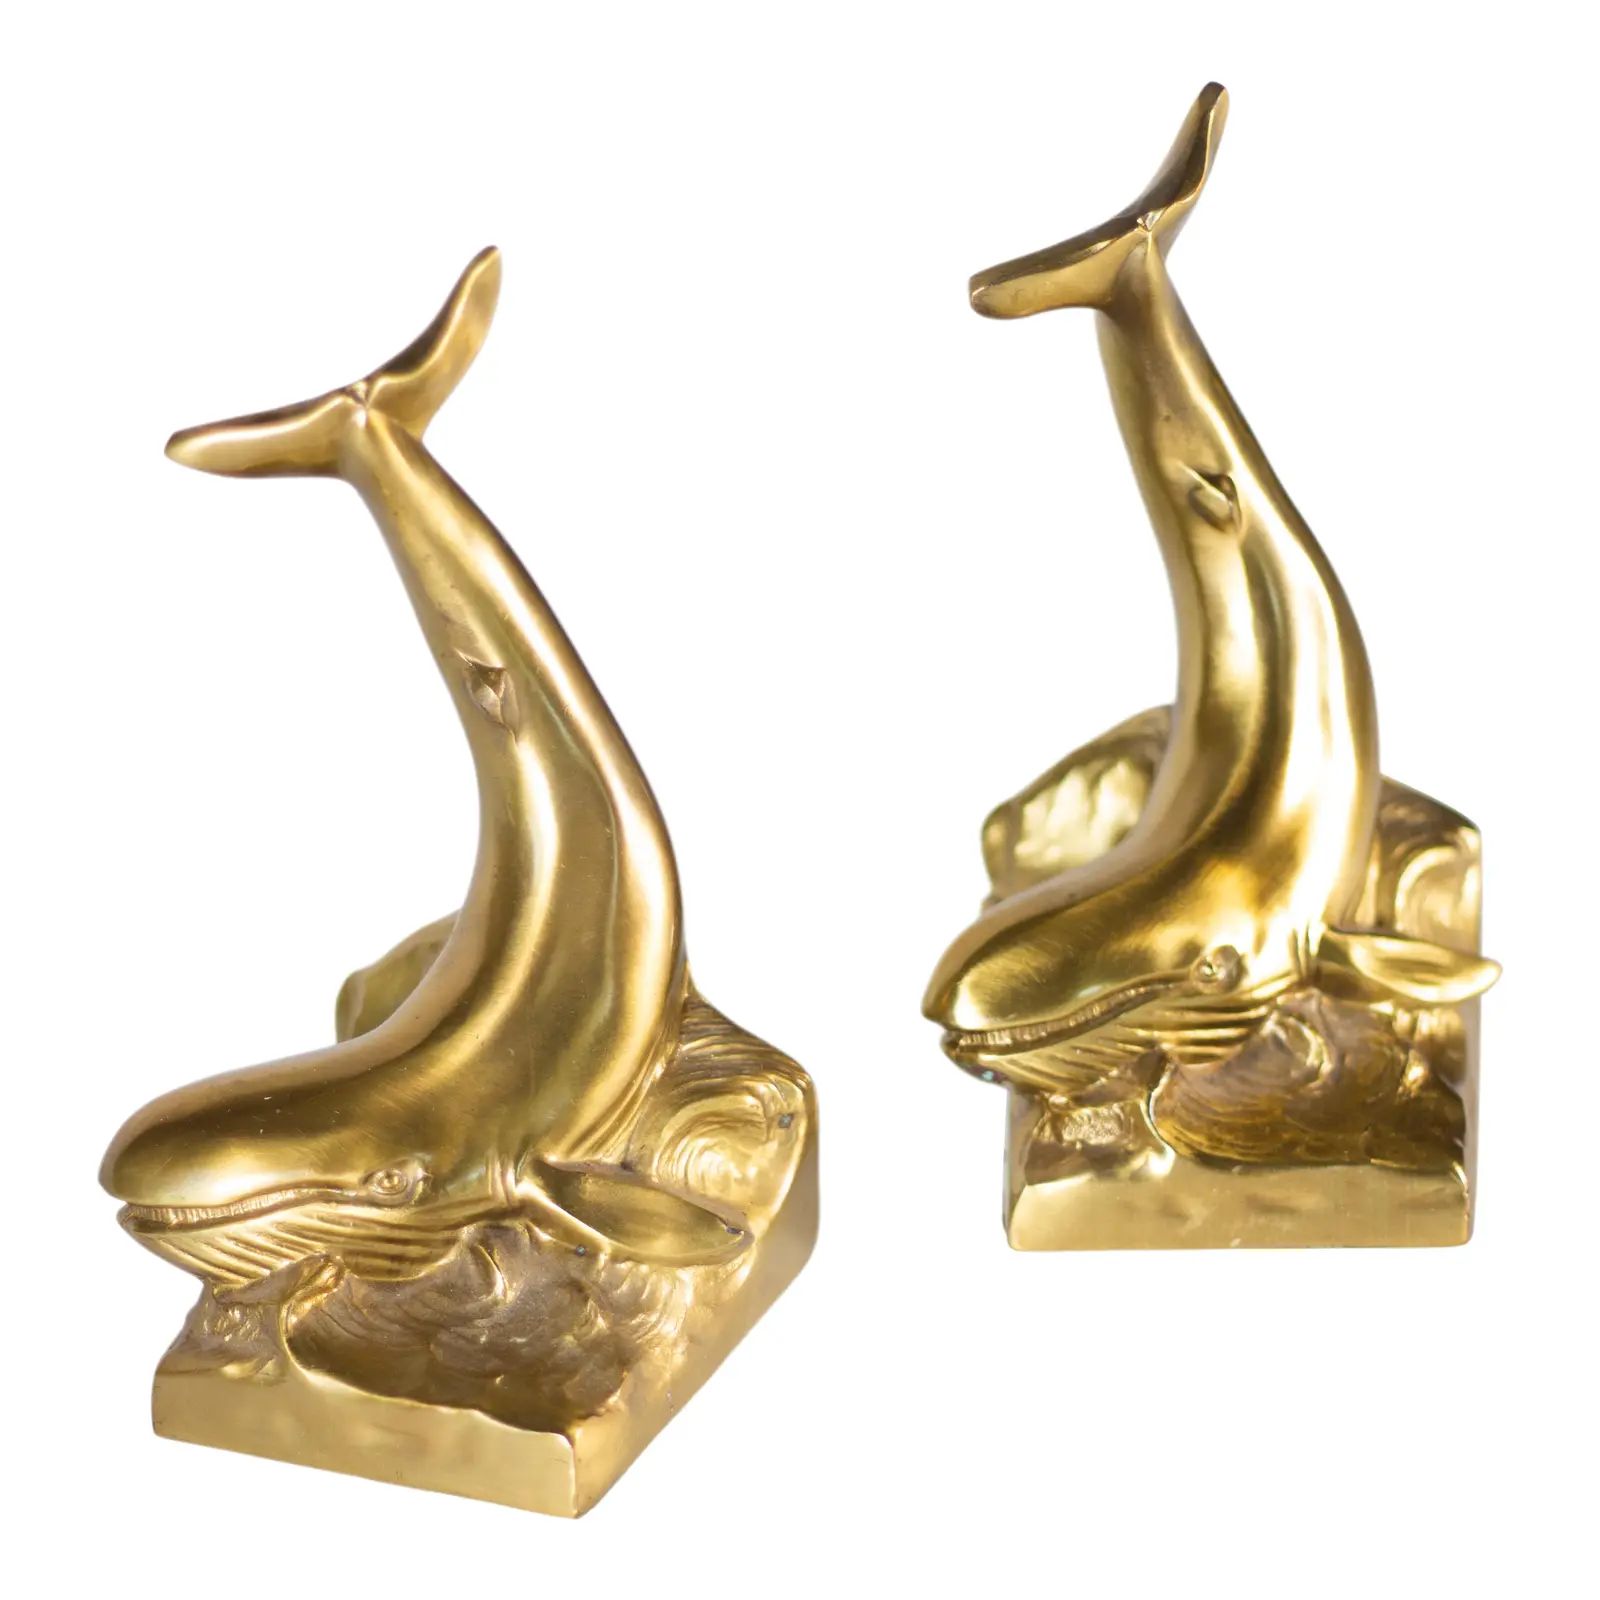 1960s Metal Brass Whale Bookends - a Pair | Chairish